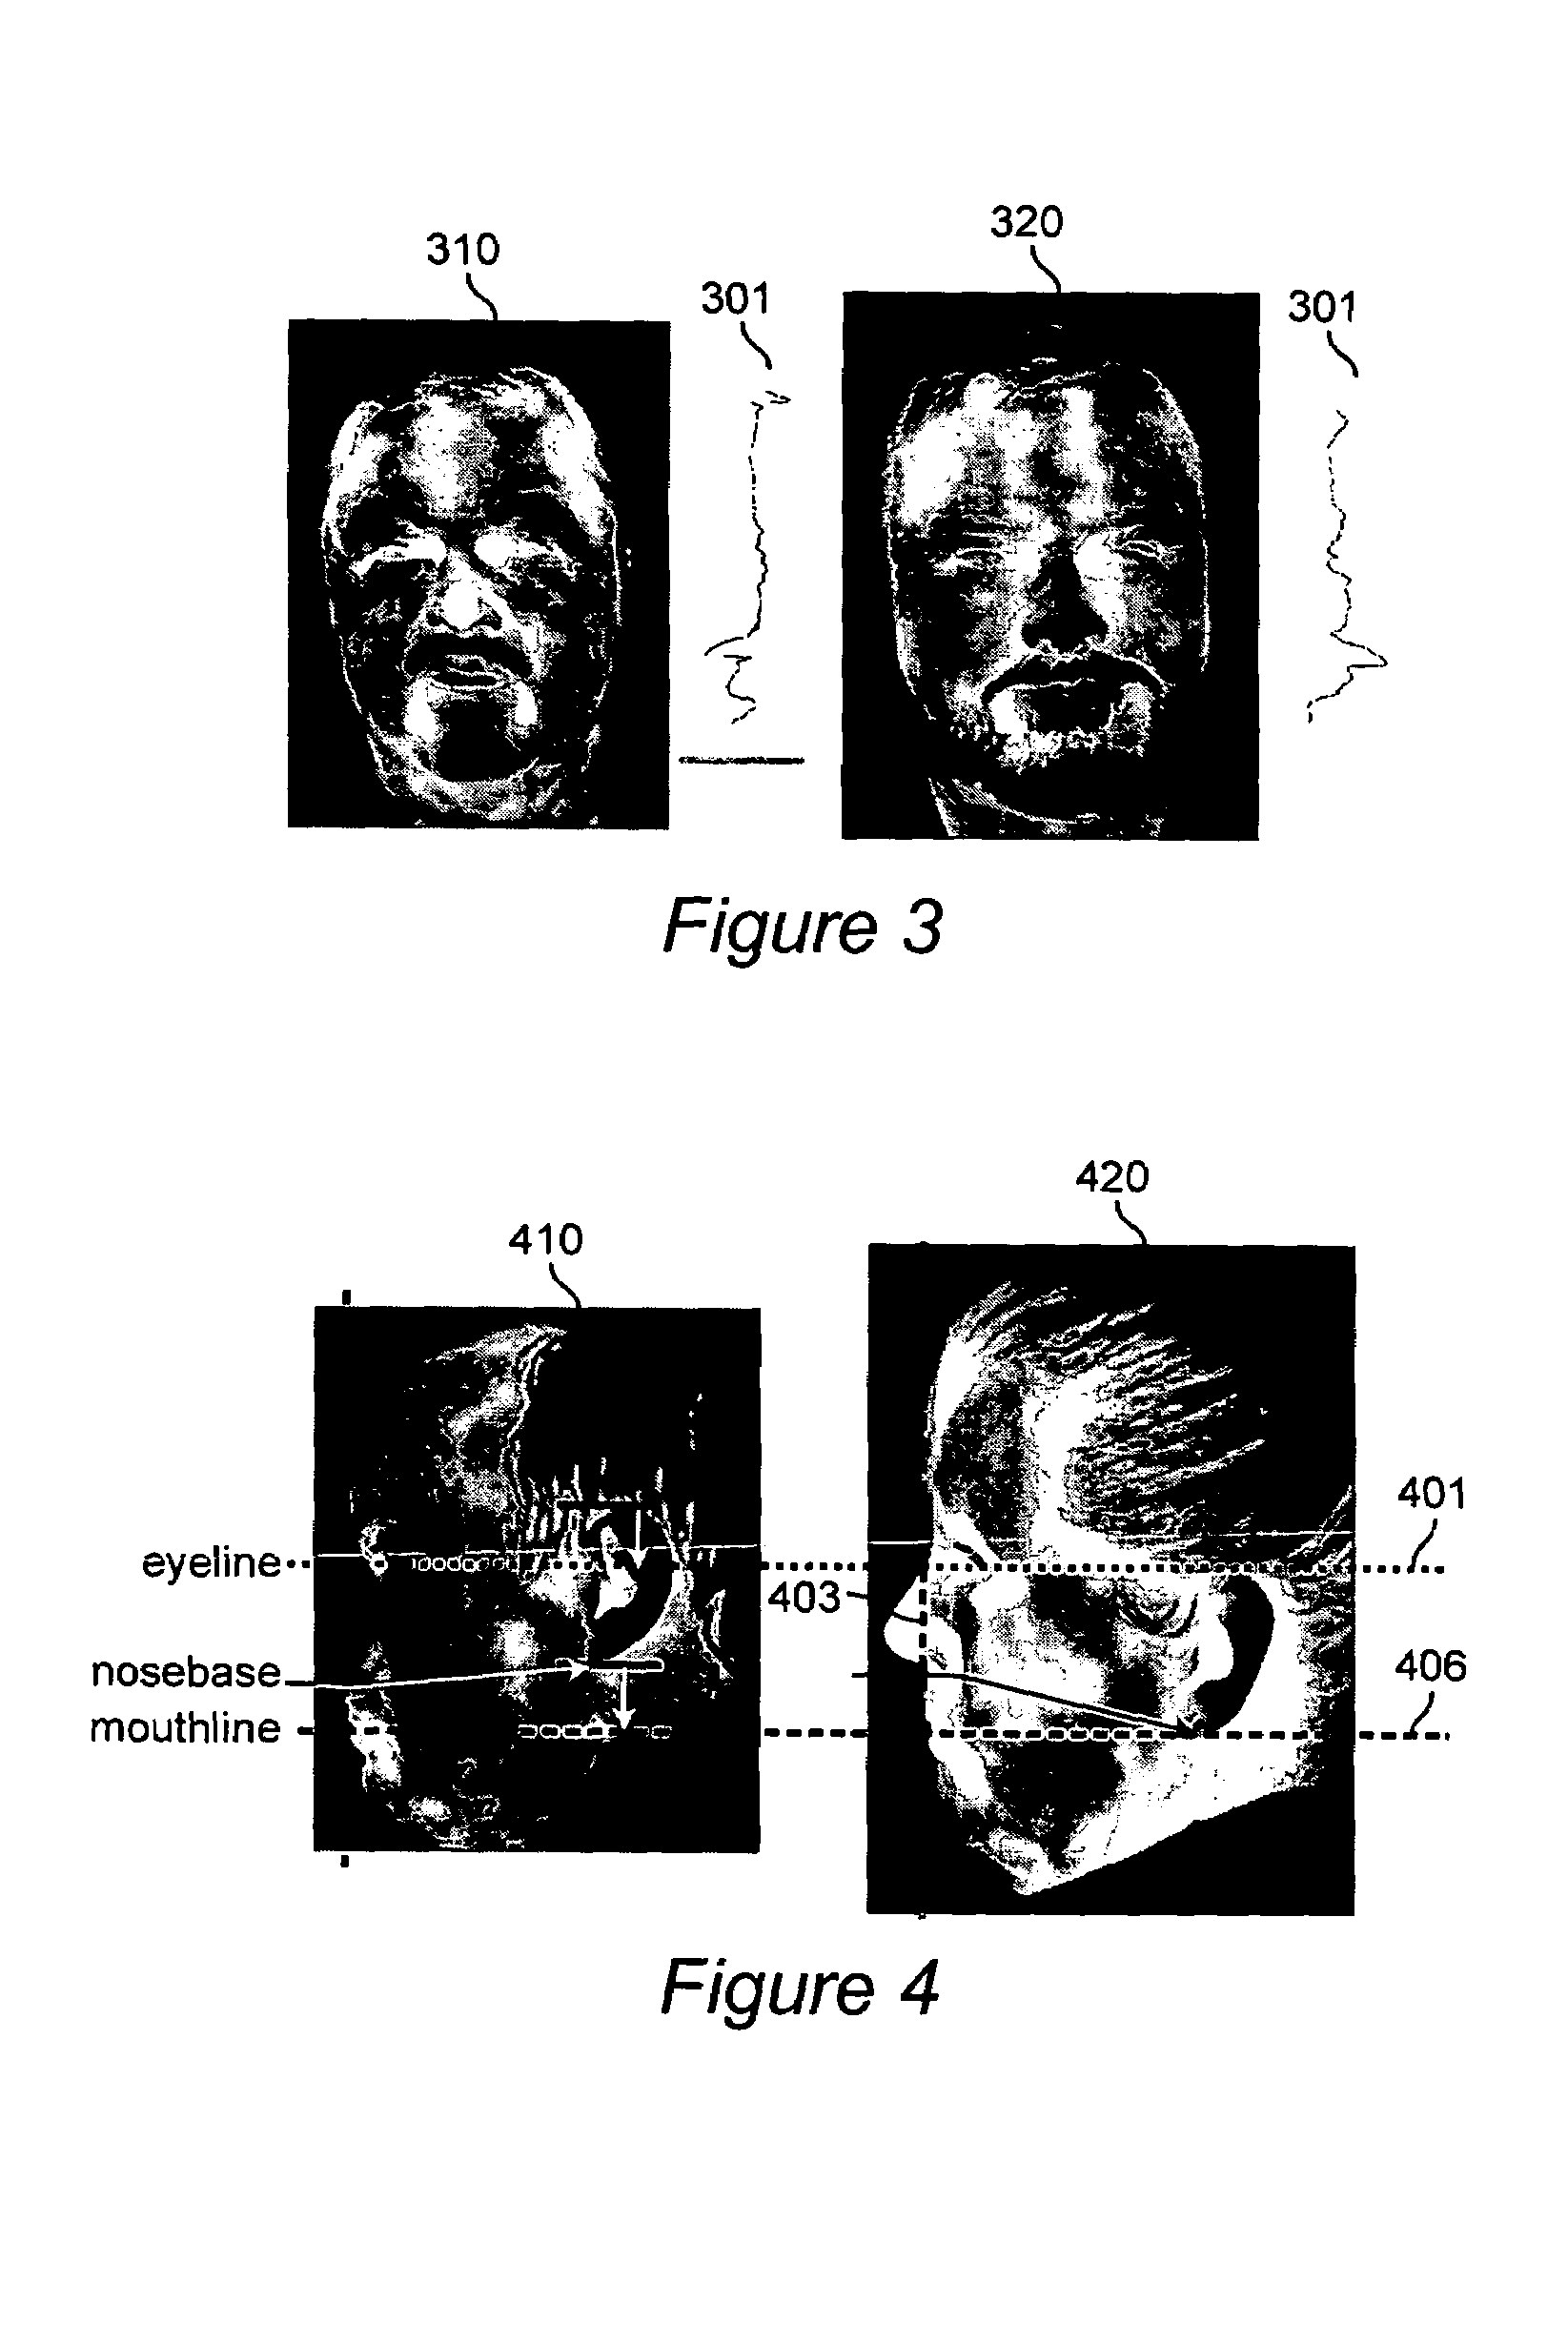 Method and apparatus for operator condition monitoring and assessment